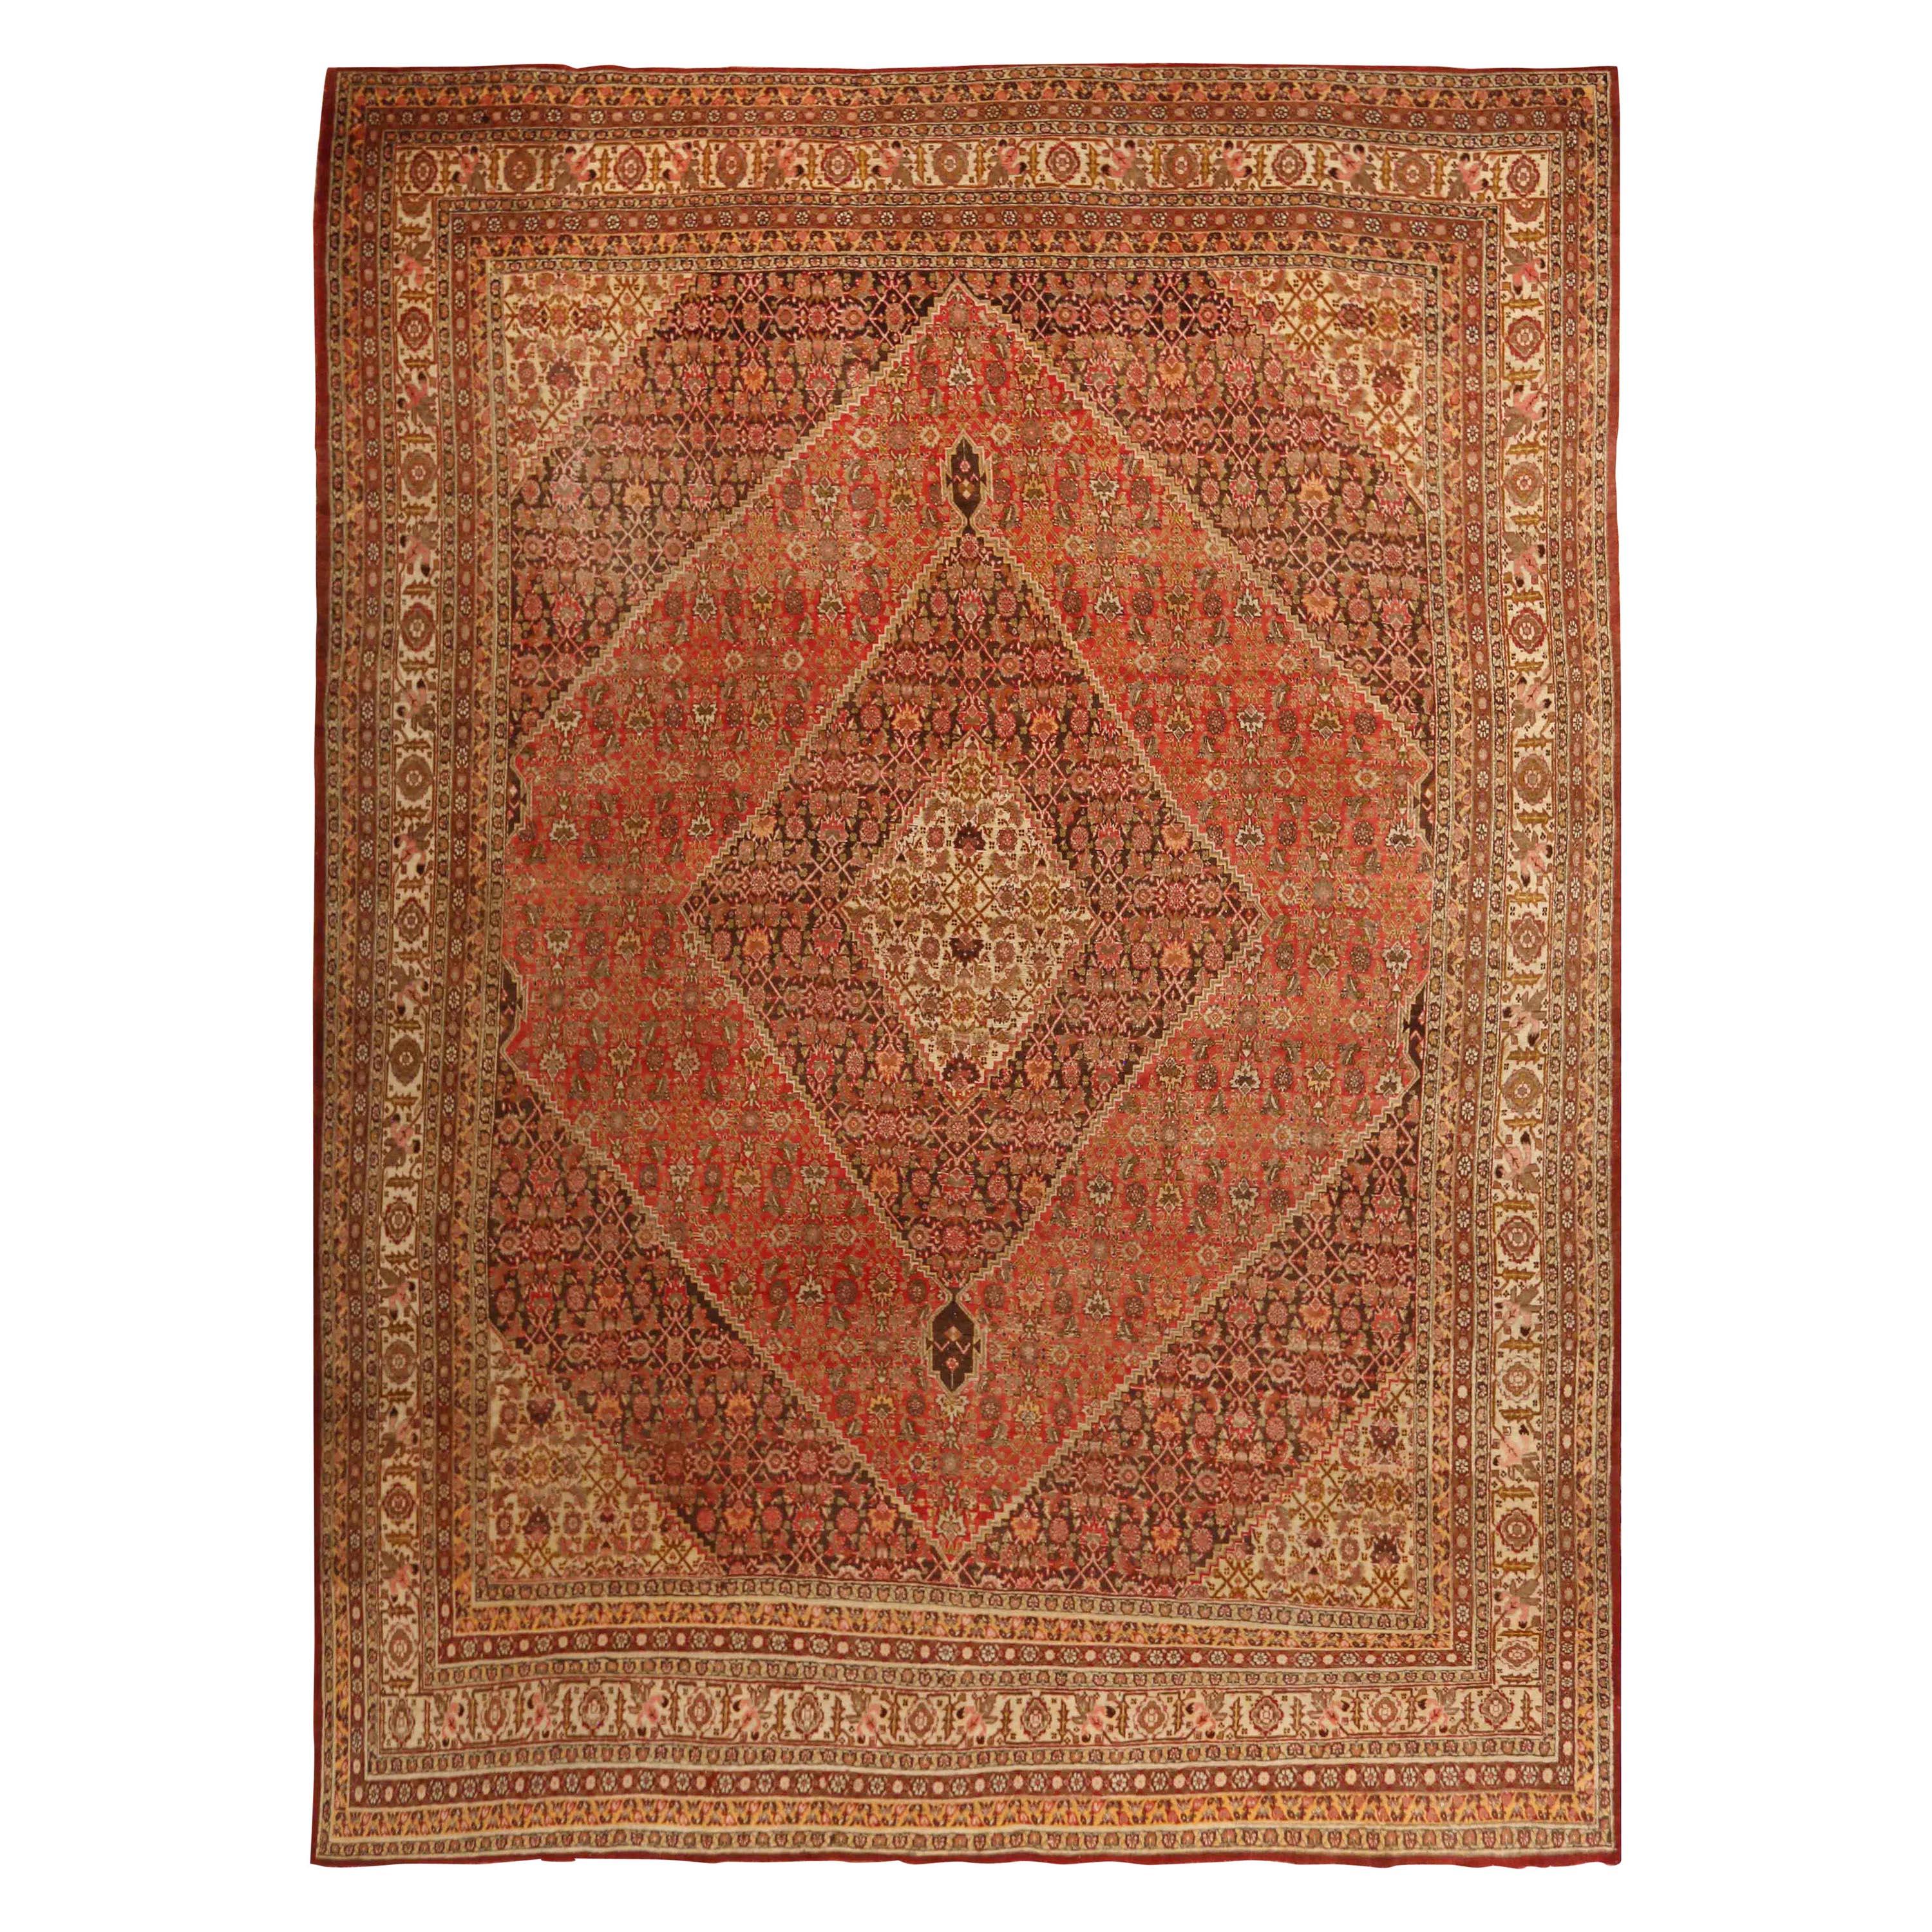 Antique Persian Tabriz Rug with Large Diamond and Floral Patterns, circa 1910s